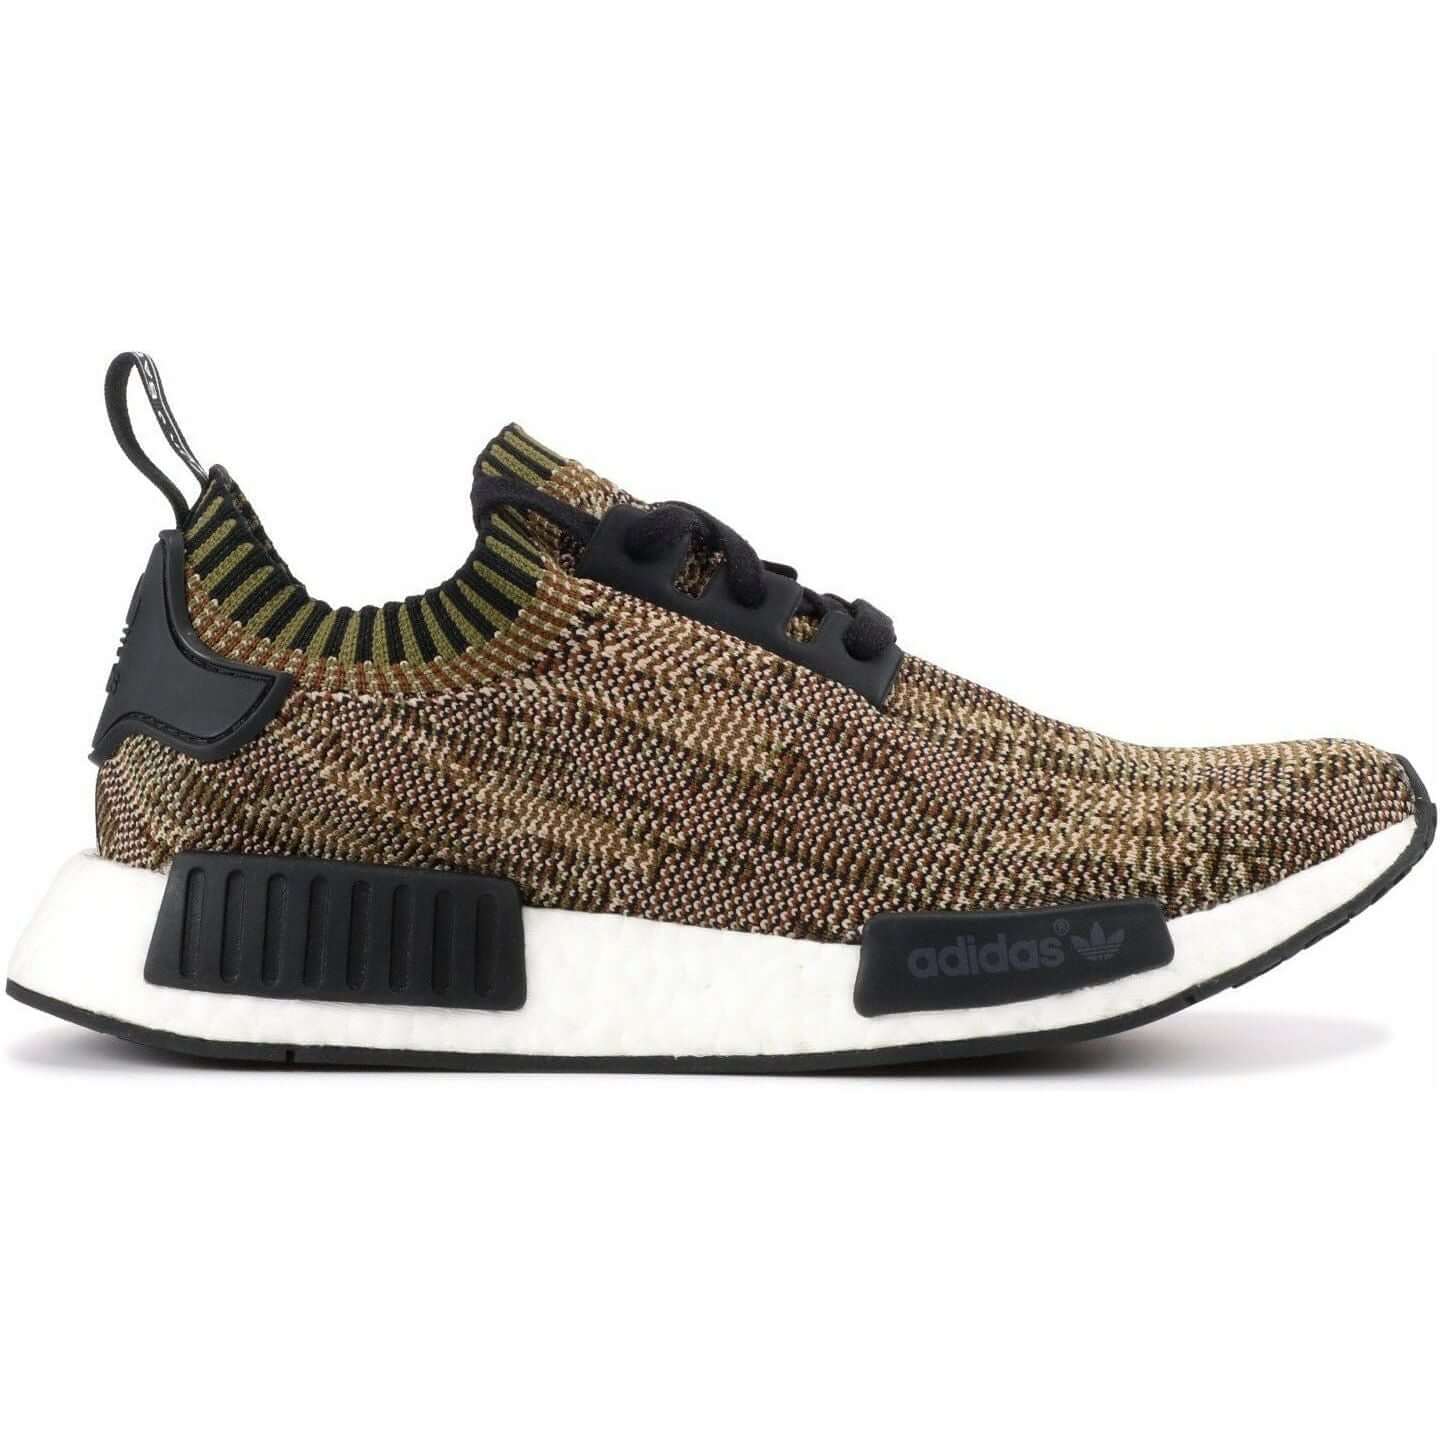 adidas NMD R1 Olive Camo from Adidas